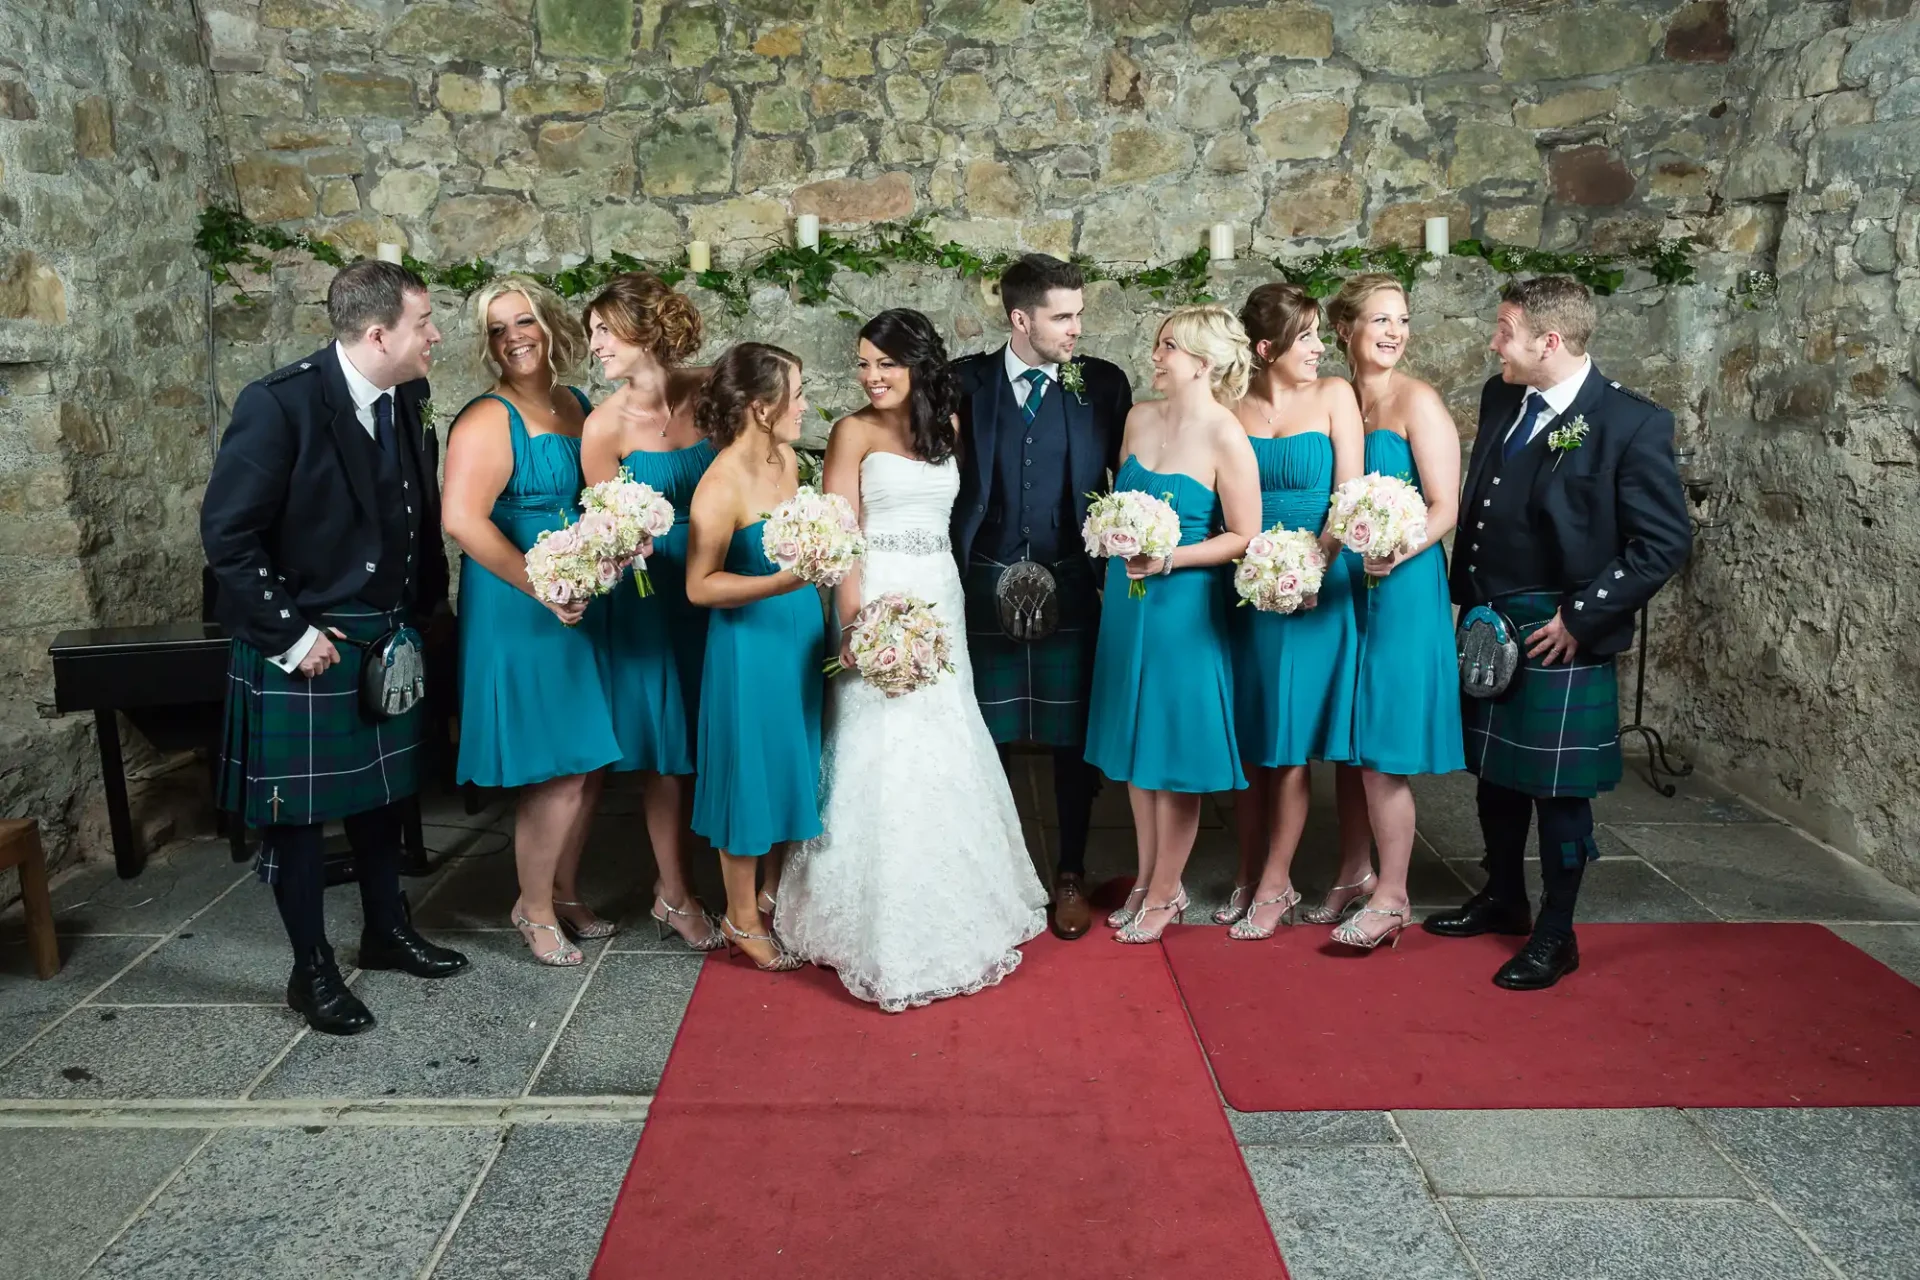 Wedding group in semi-formal attire, with men in kilts and a bride in a white dress, standing against a stone wall, smiling and interacting.